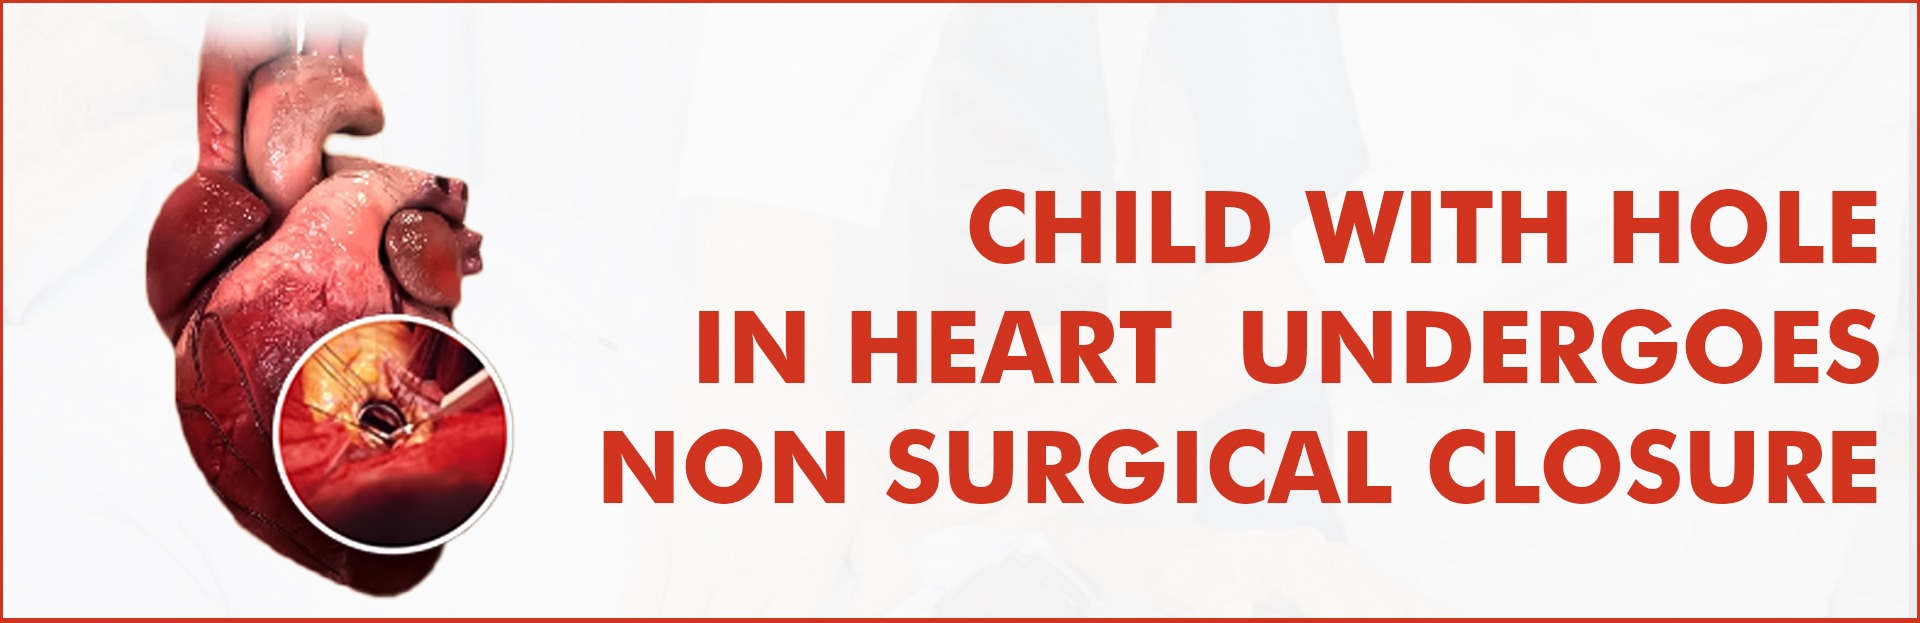 Child with Hole in Heart Undergoes Non Surgical Closure - SPS